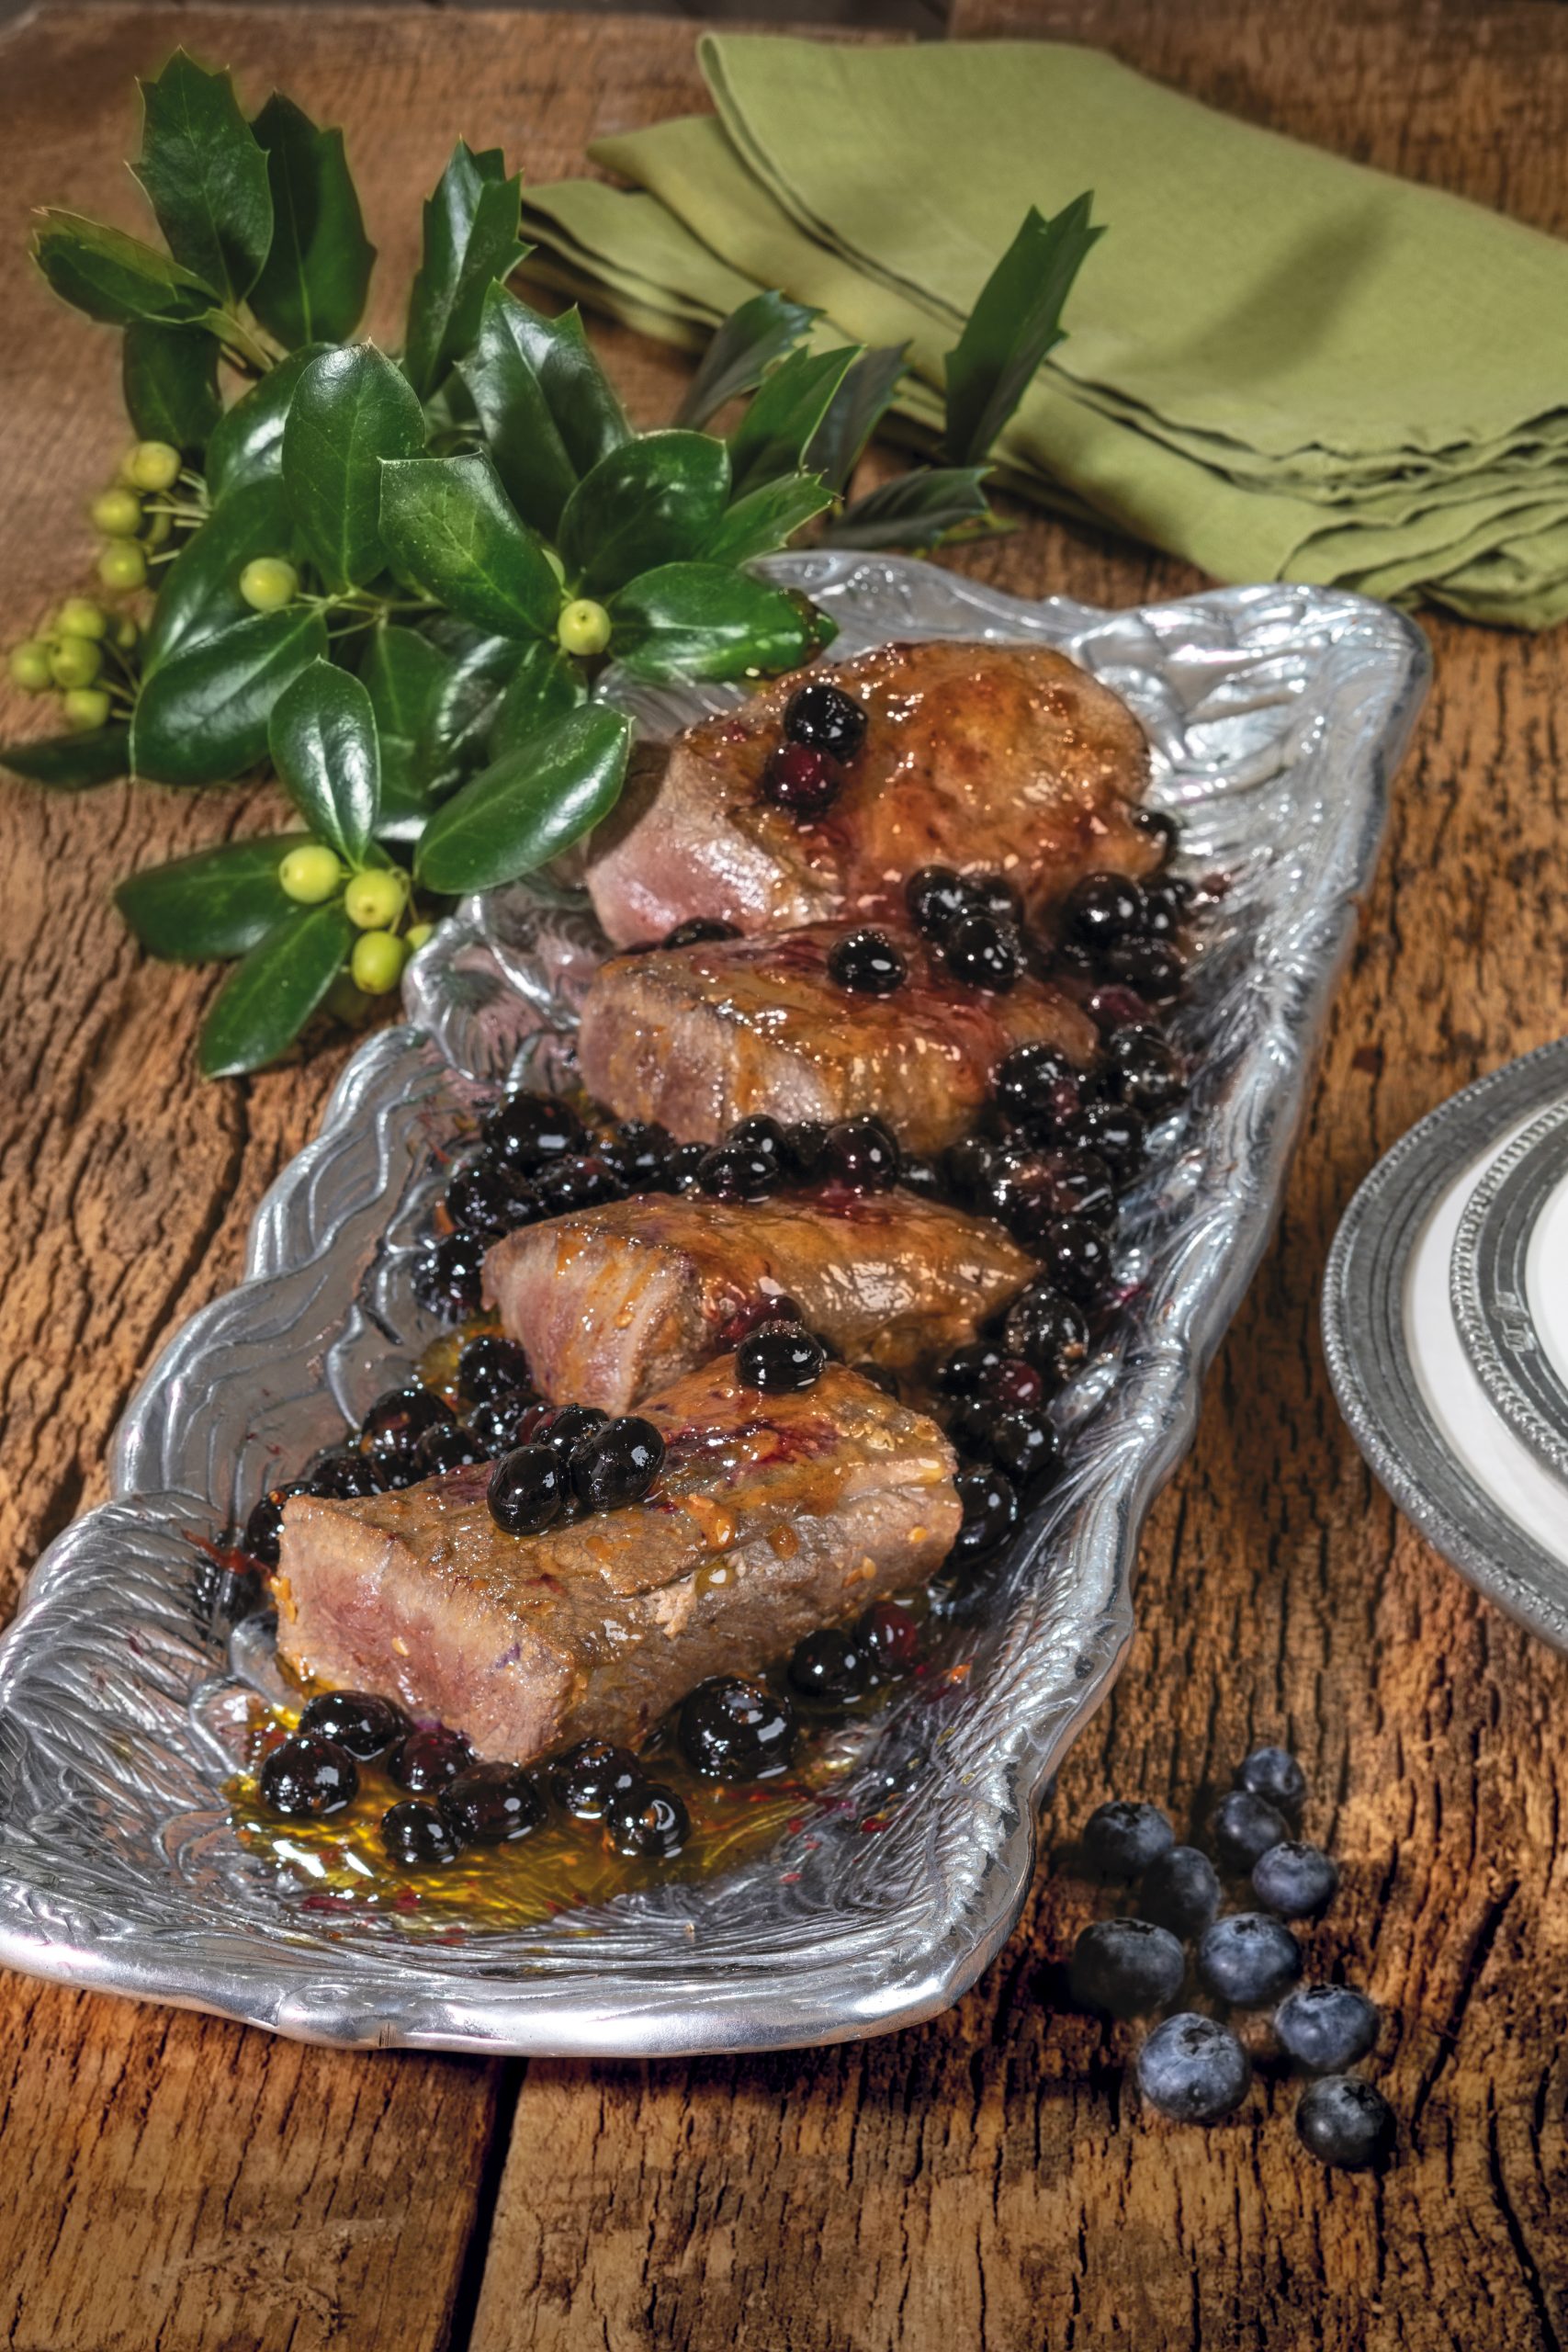 The delights of backstraps and tenderloins are better experienced in person than described in print. Try the Backstrap in Blueberries recipe on page 86 for a special treat! 